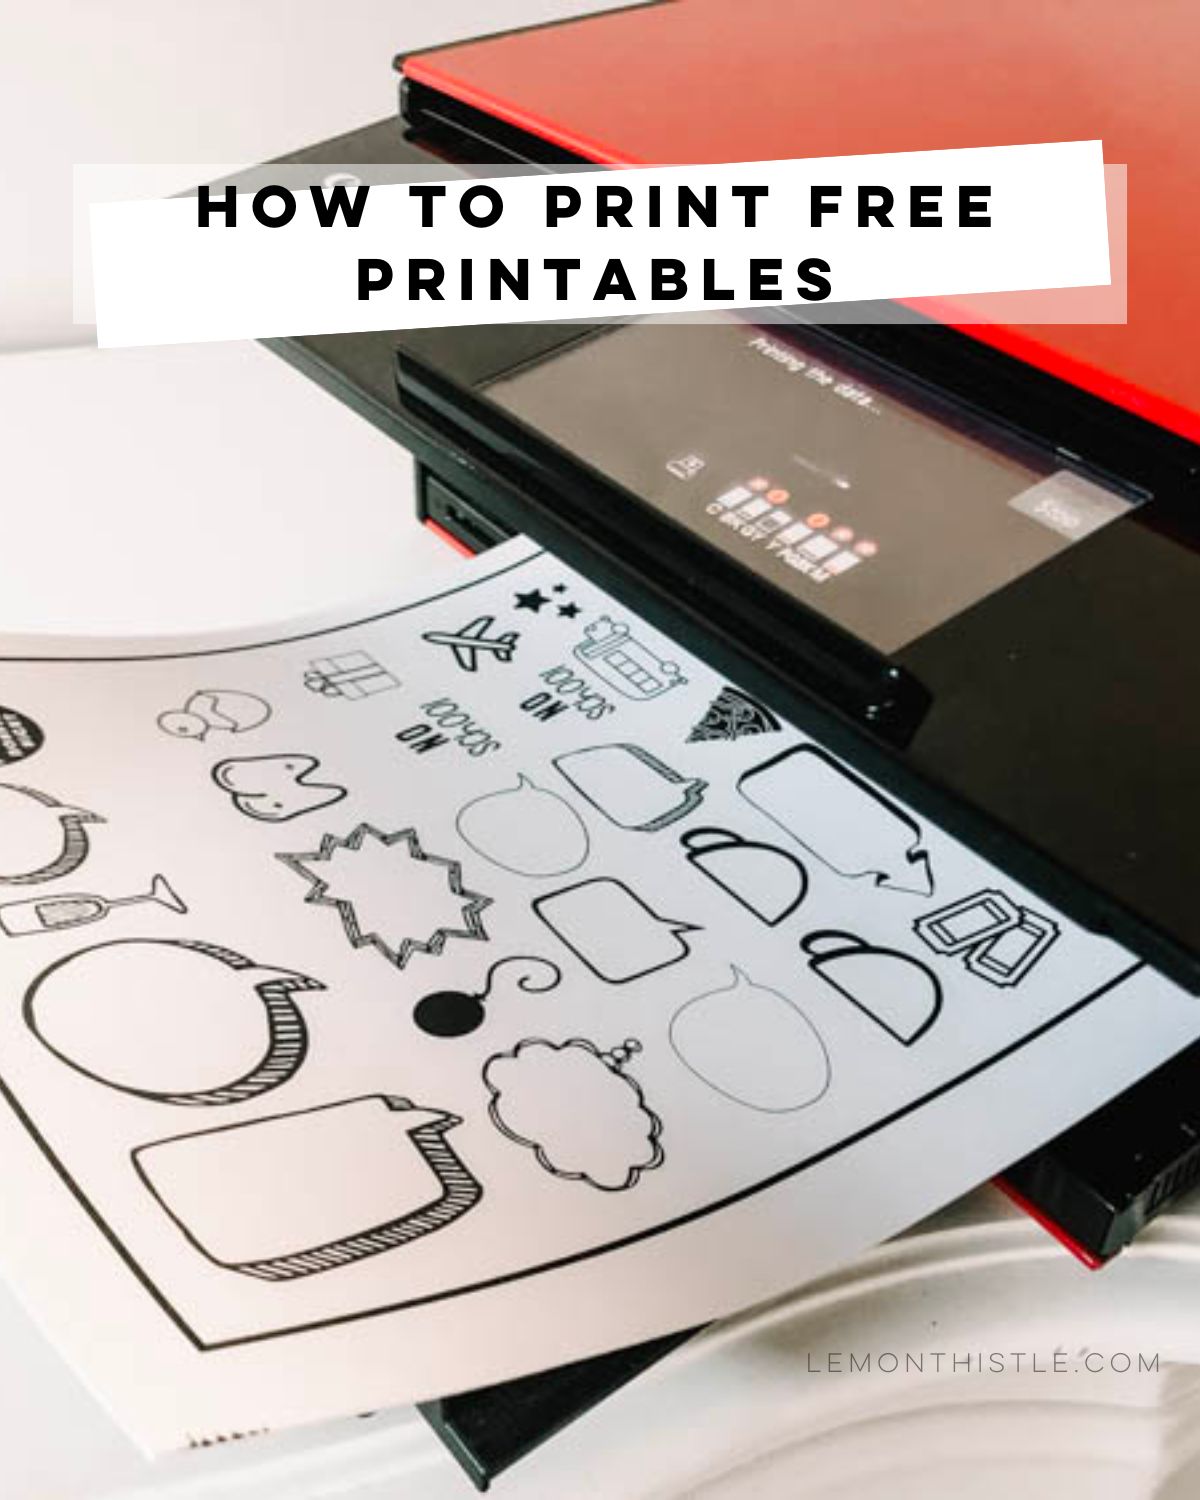 How to print free printables | text over image of printable stickers in printer